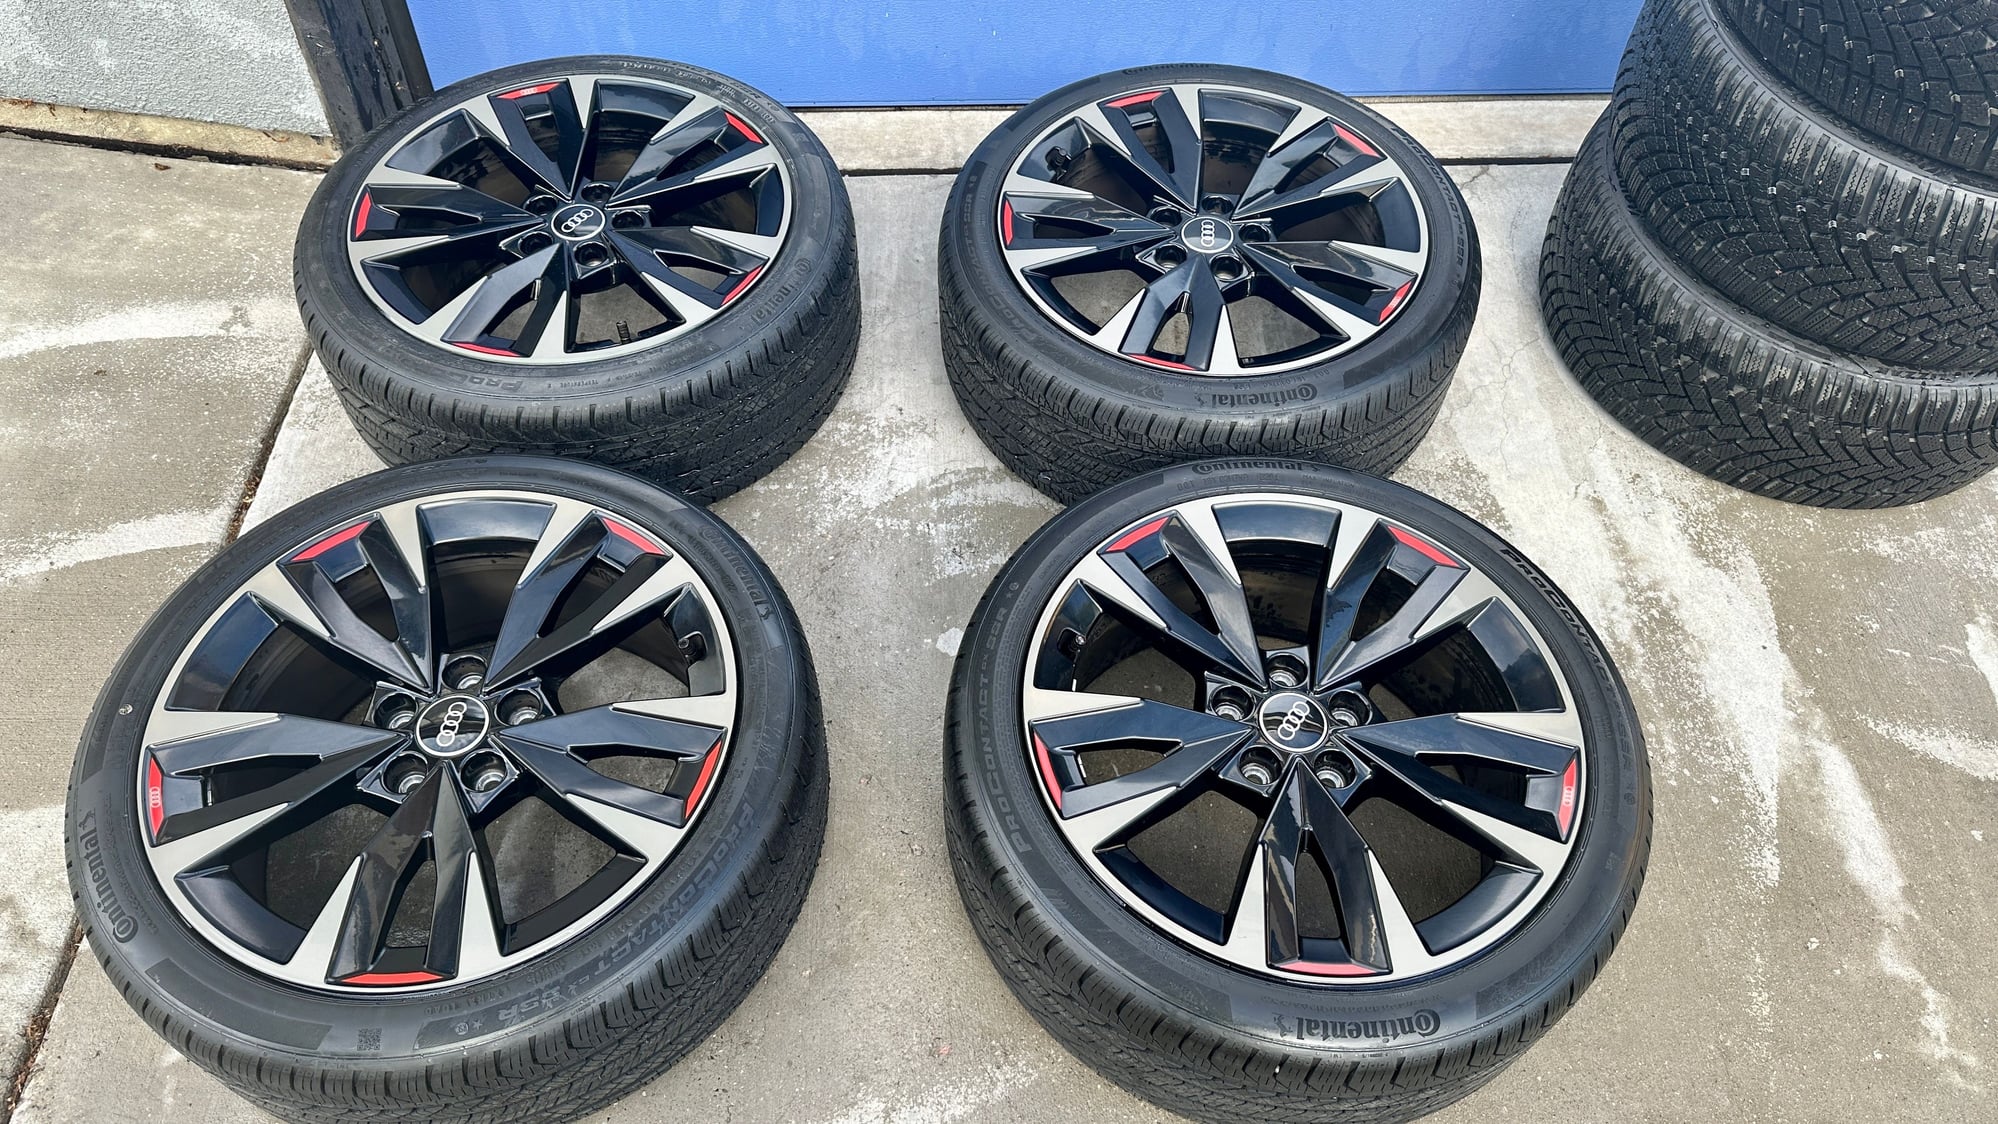 Wheels and Tires/Axles - FS: Like-New 18” Audi Wheels with All-Season and Winter Tires - Used - 2022 to 2024 Audi S3 - 2021 to 2024 Audi A3 - 2021 to 2024 Volkswagen Golf R - Denver, CO 80212, United States